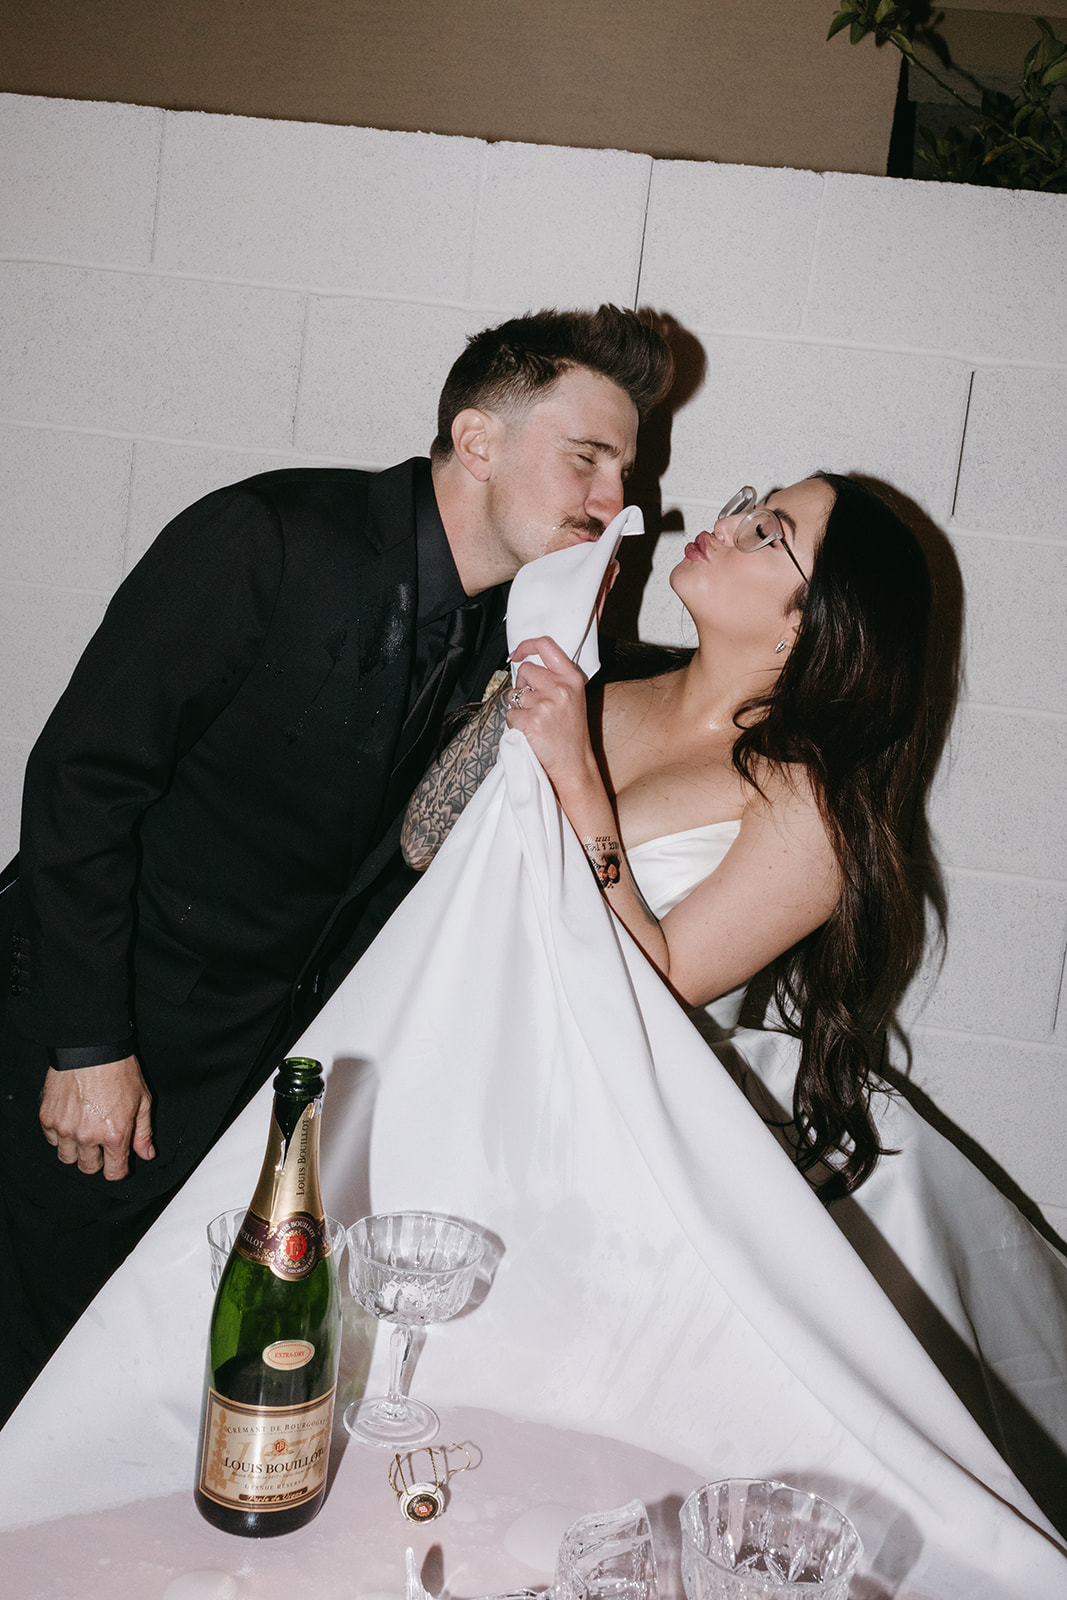 Bride using Table Cloth on Grooms Face during Fun Reception following Little White Wedding Chapel Modern Vegas Wedding Ceremony 